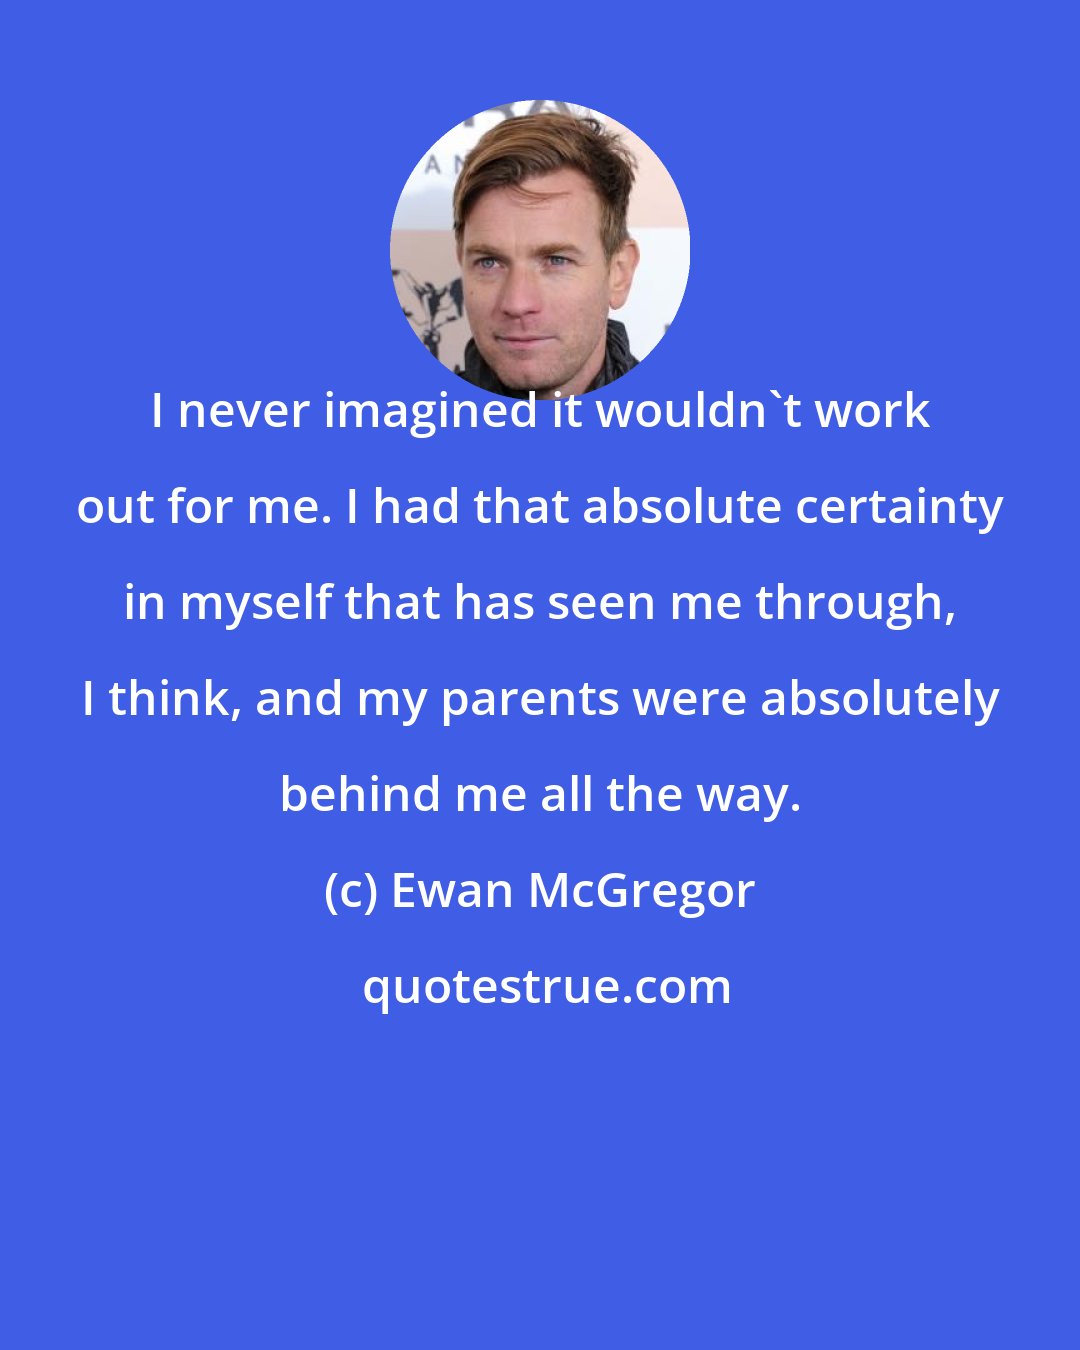 Ewan McGregor: I never imagined it wouldn't work out for me. I had that absolute certainty in myself that has seen me through, I think, and my parents were absolutely behind me all the way.